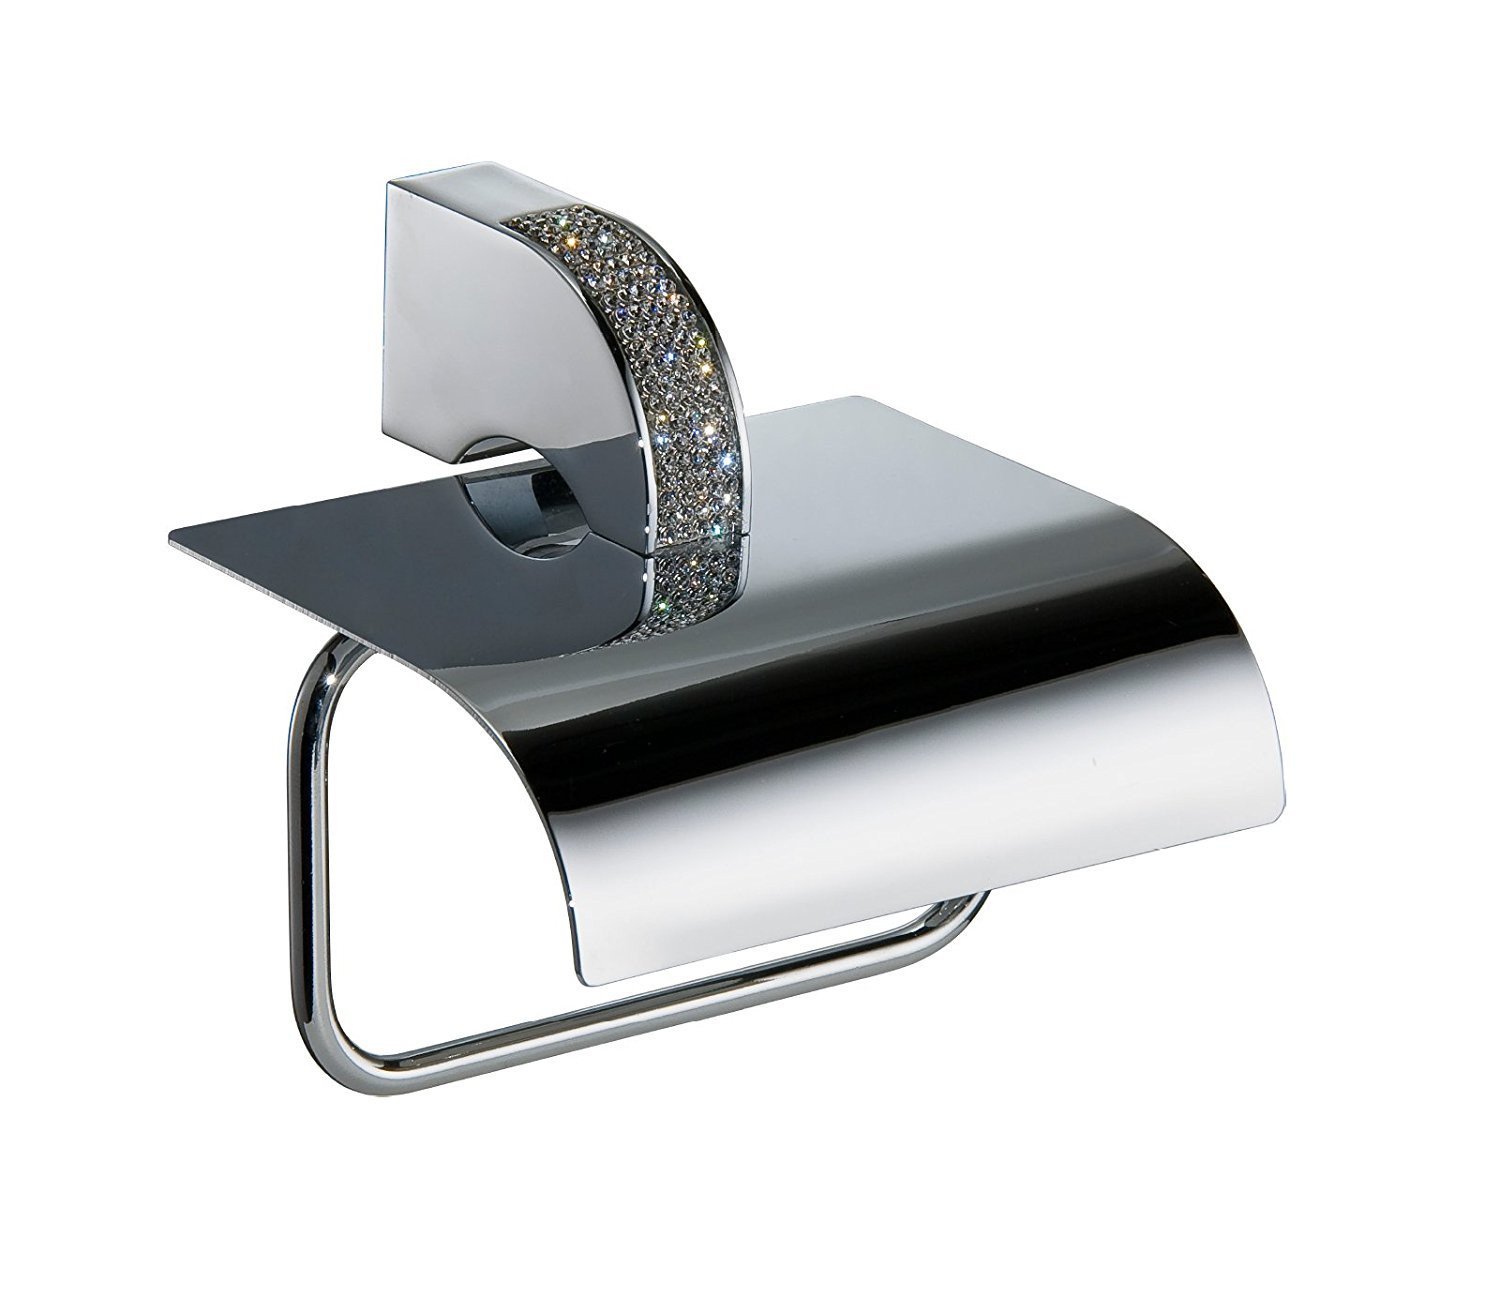 Primary image for Cecilia toilet paper holder with cover. Swarovski crystals inlaid